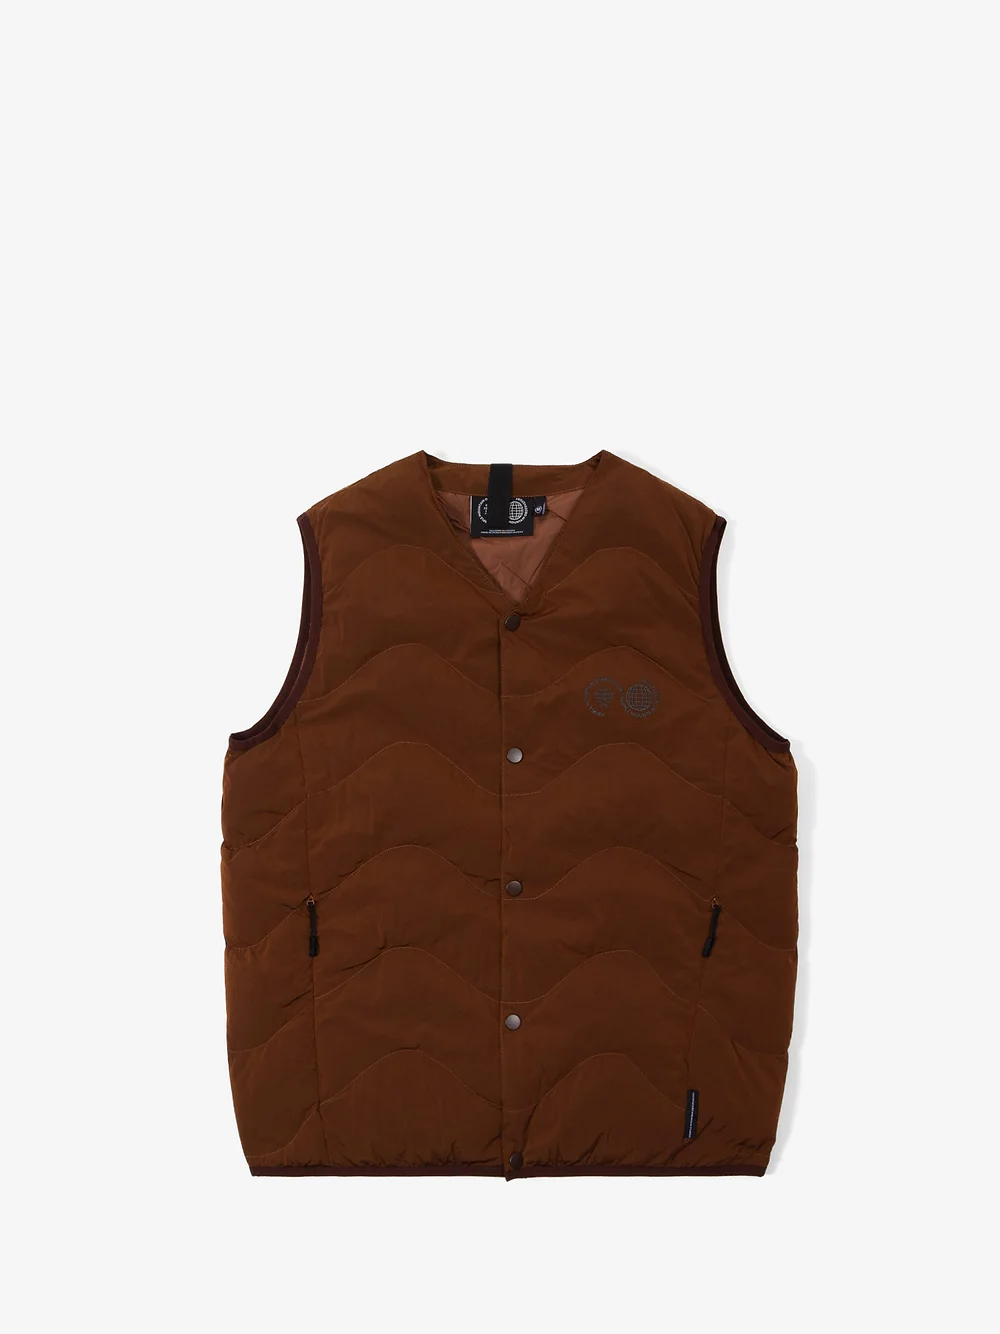 Featured image for “WAVE QUILTED VEST MONKS ROBE”